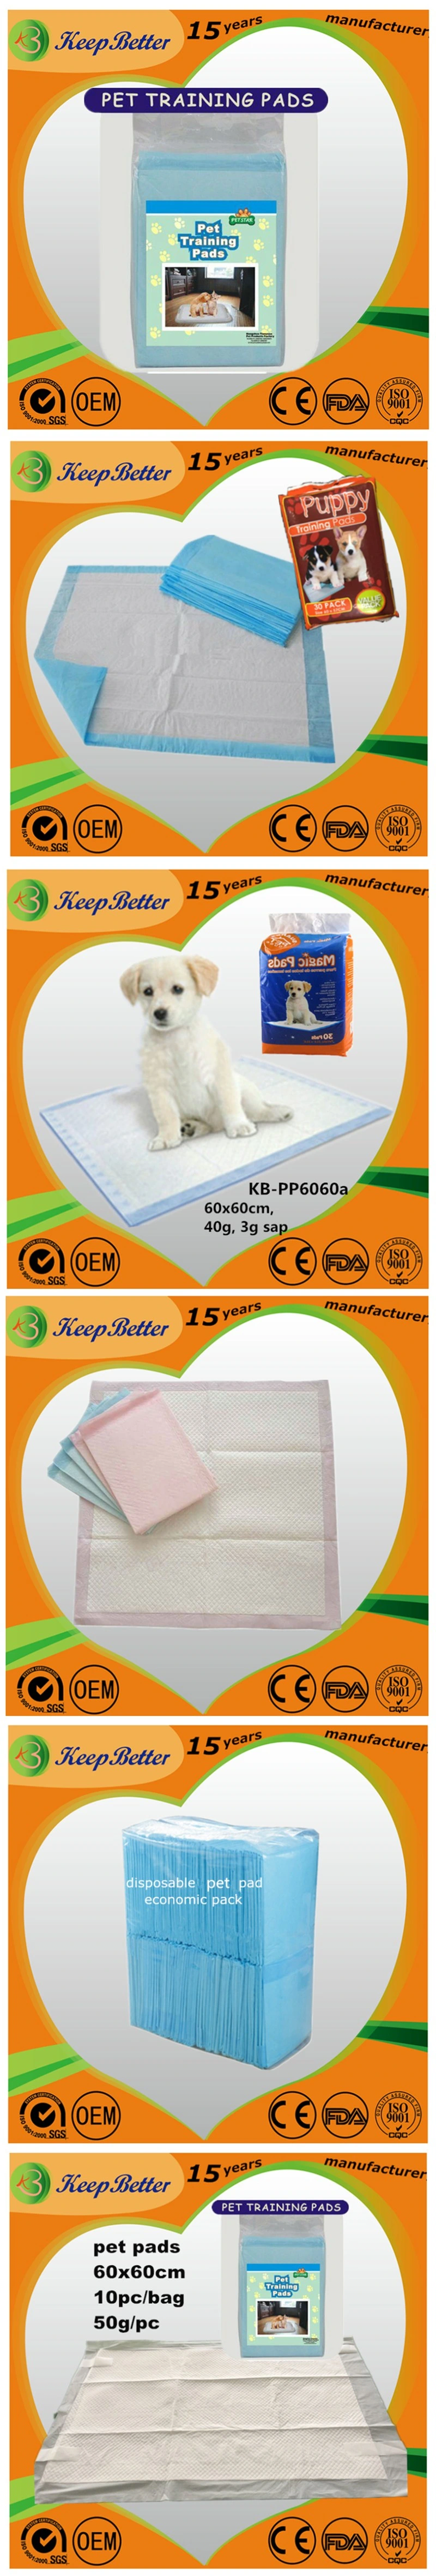 Pets/Dogs/Puppy/Cats Incontinence Training Sleeping PEE Wee Wee Pad